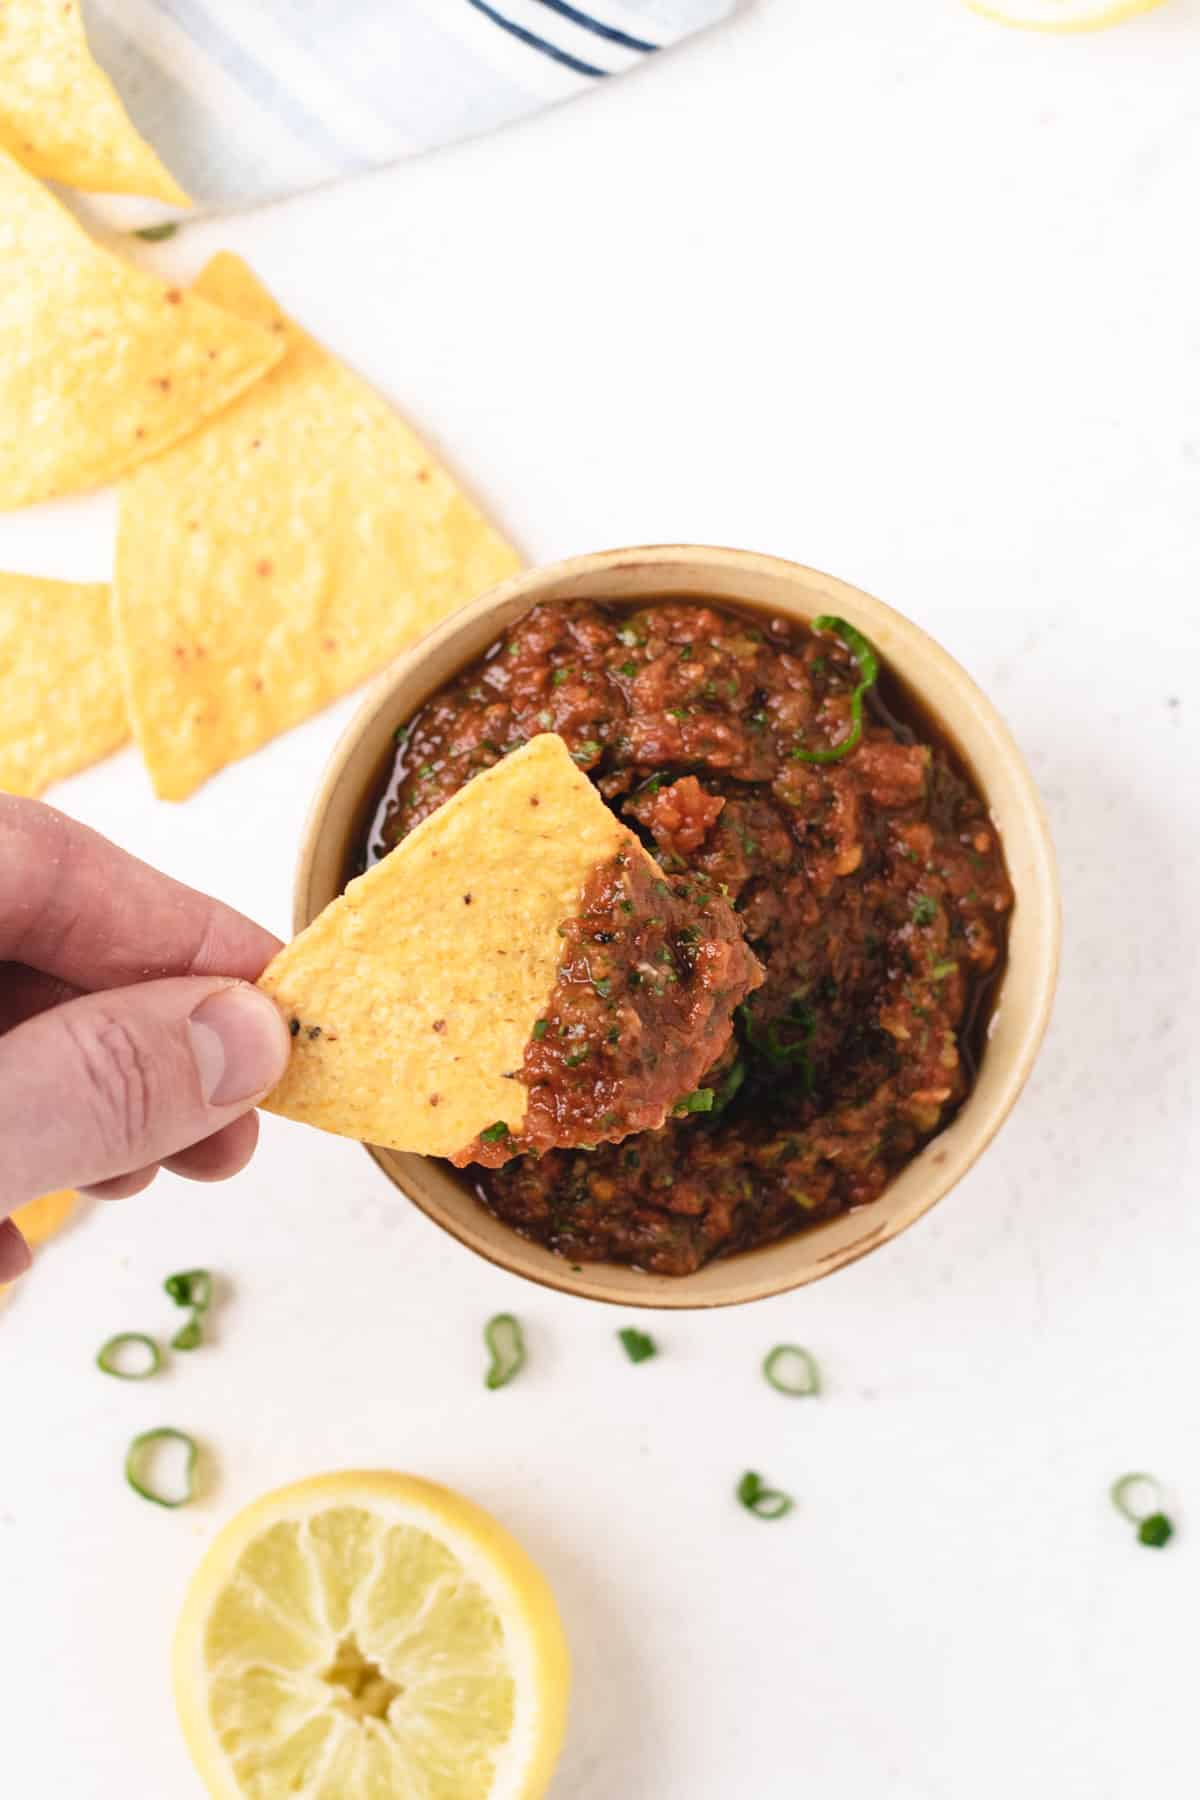 A photo of a hand holding a tortilla chip, dipping it into a small bowl of salsa.